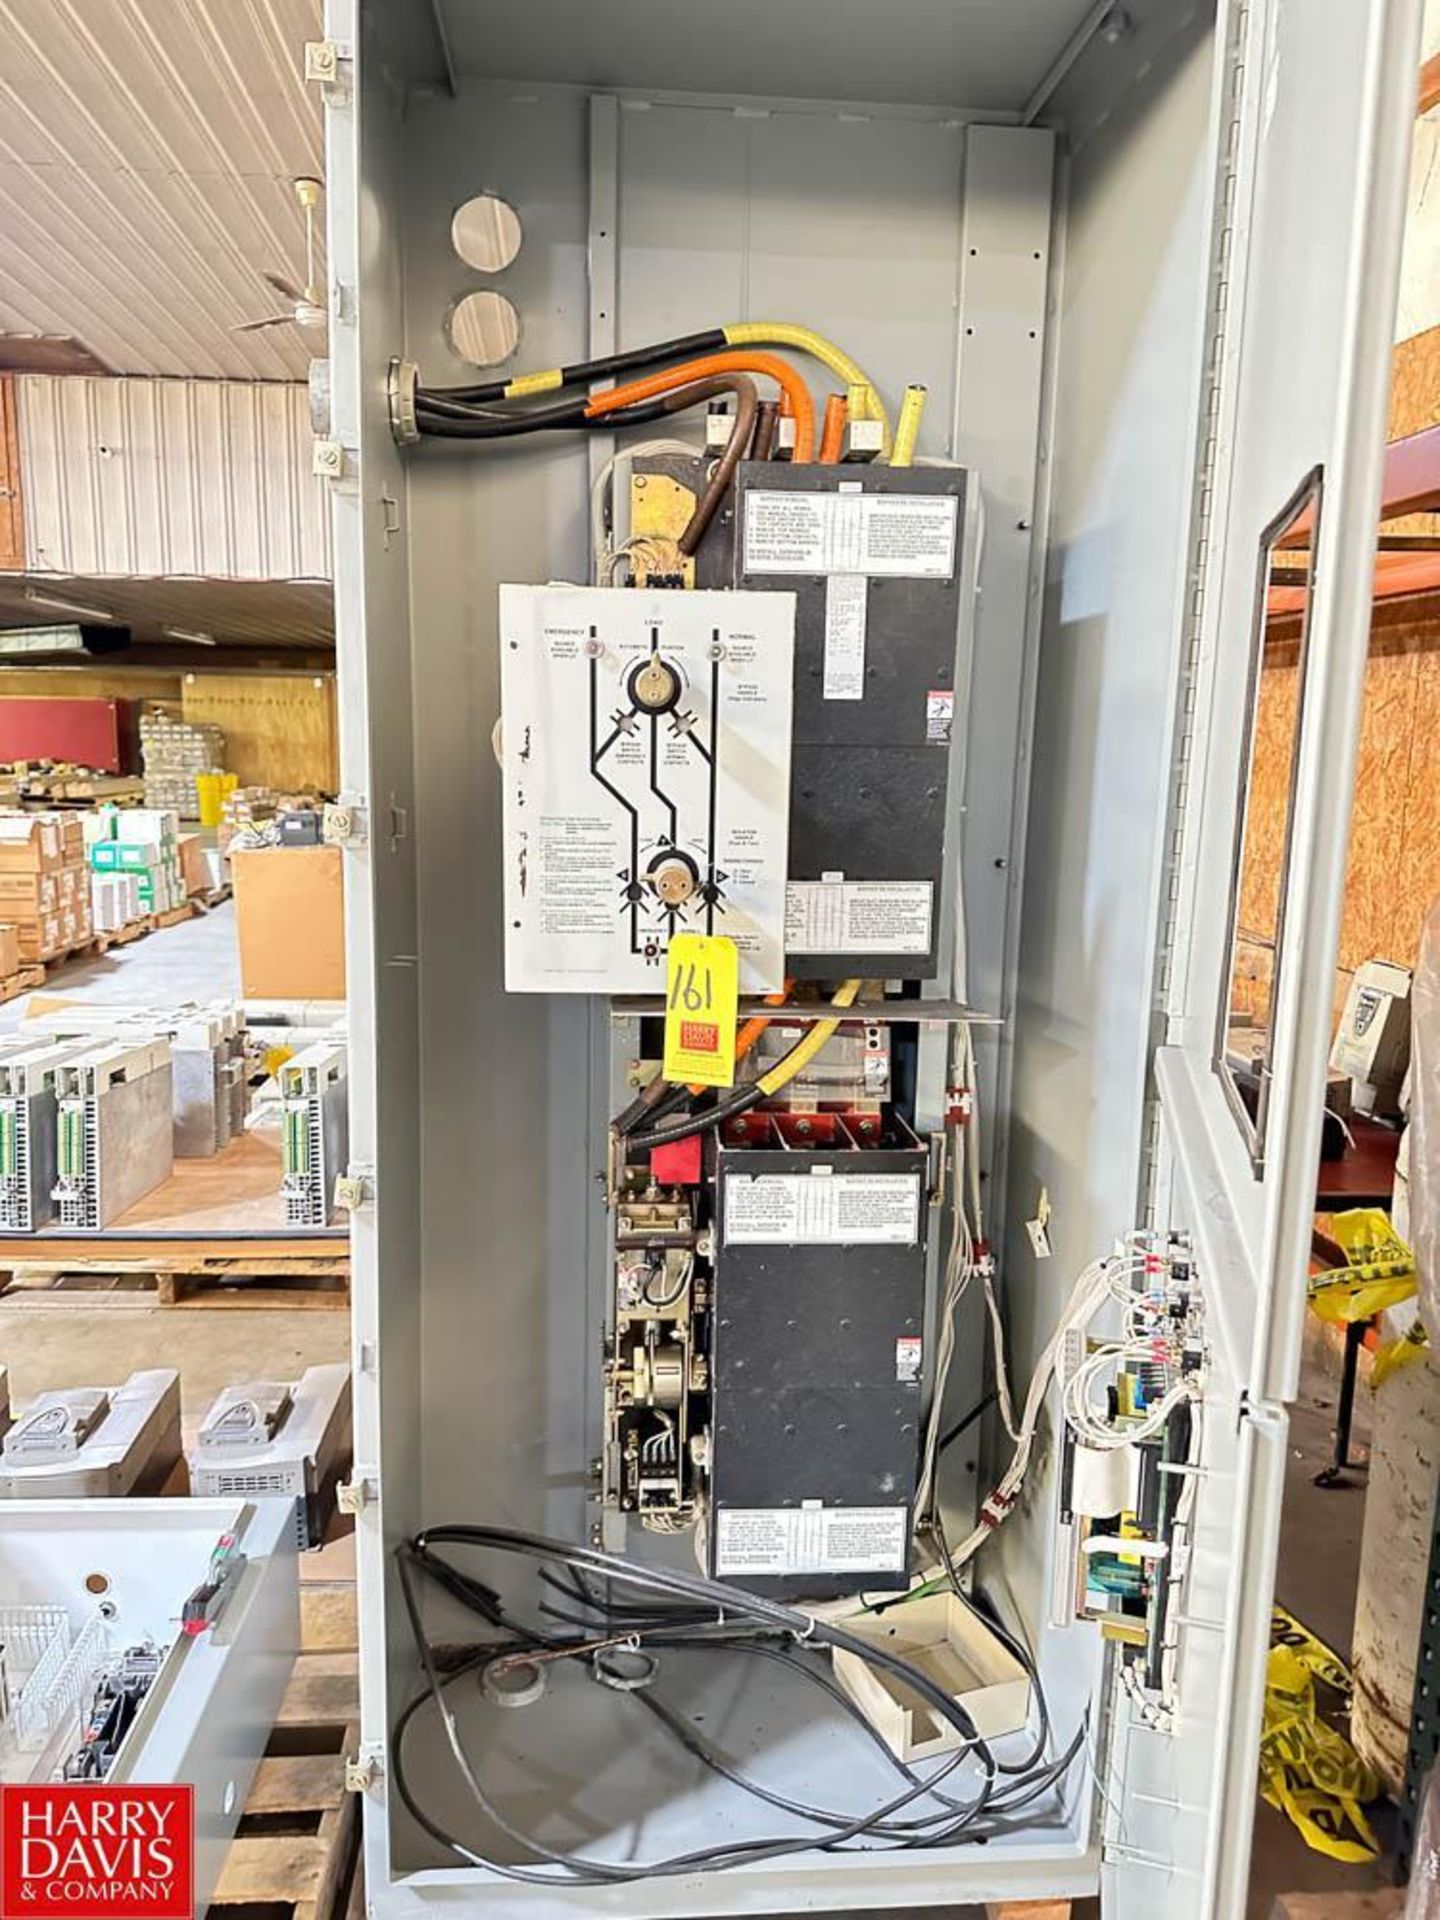 Transfer Switch with Enclosure